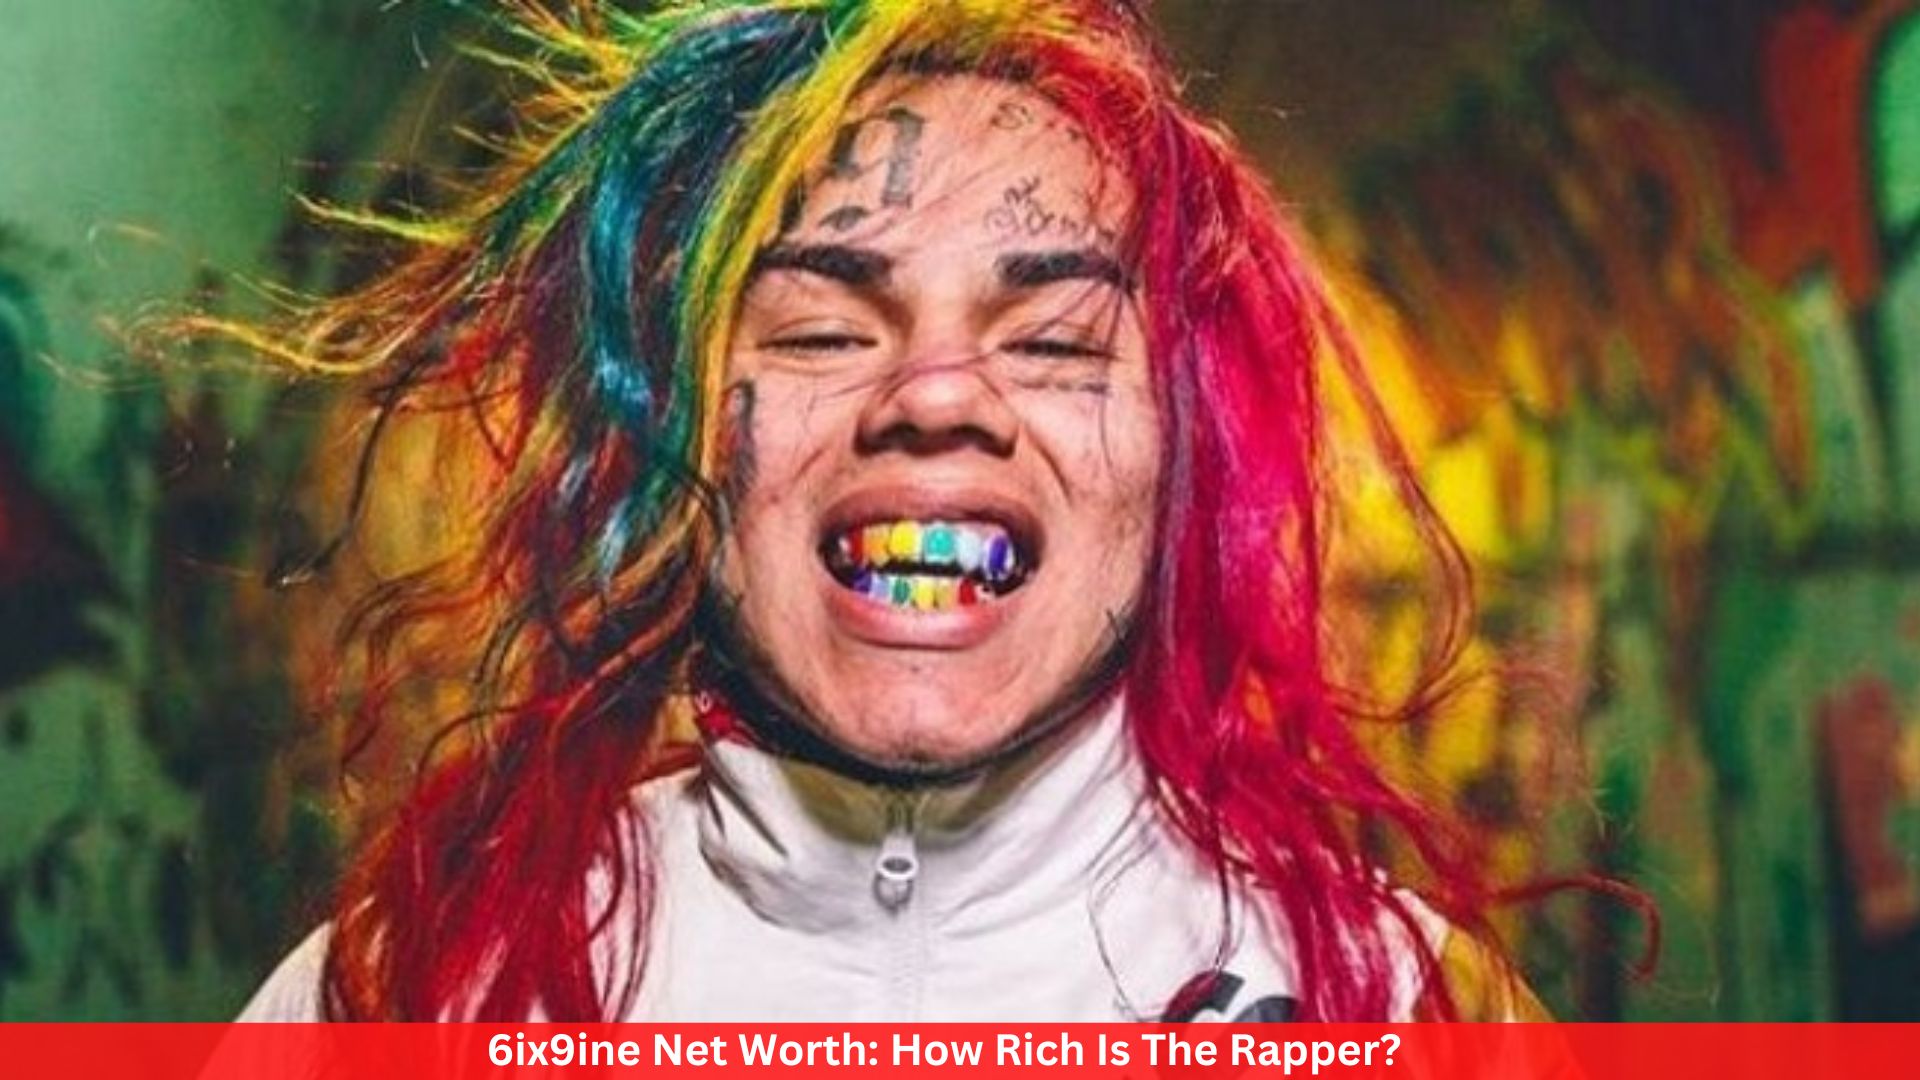 6ix9ine Net Worth: How Rich Is The Rapper?